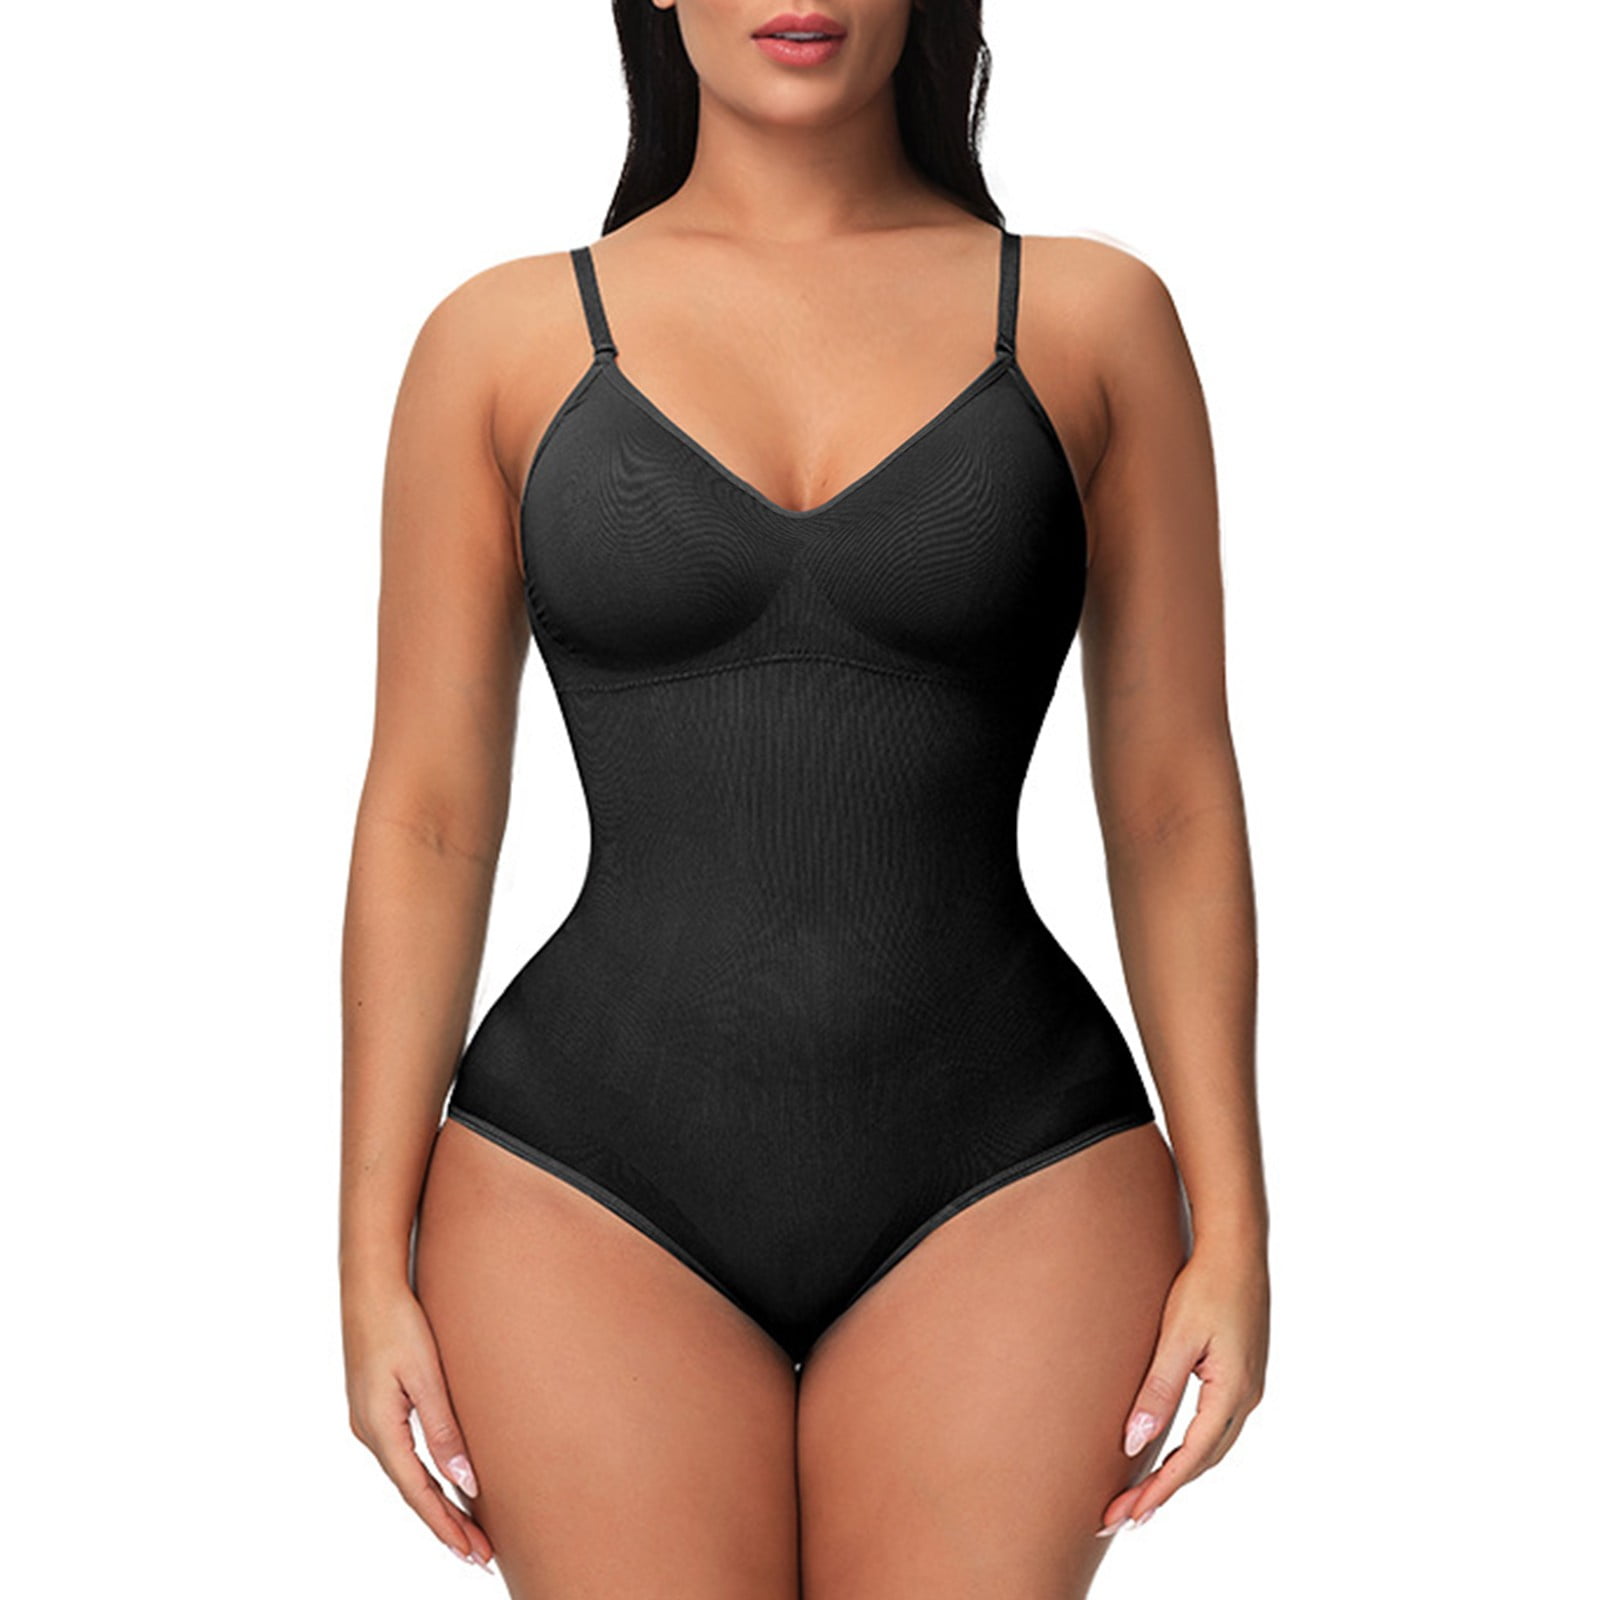 LBECLEY Low Back Compression Shapewear Bodysuit Thong for Women